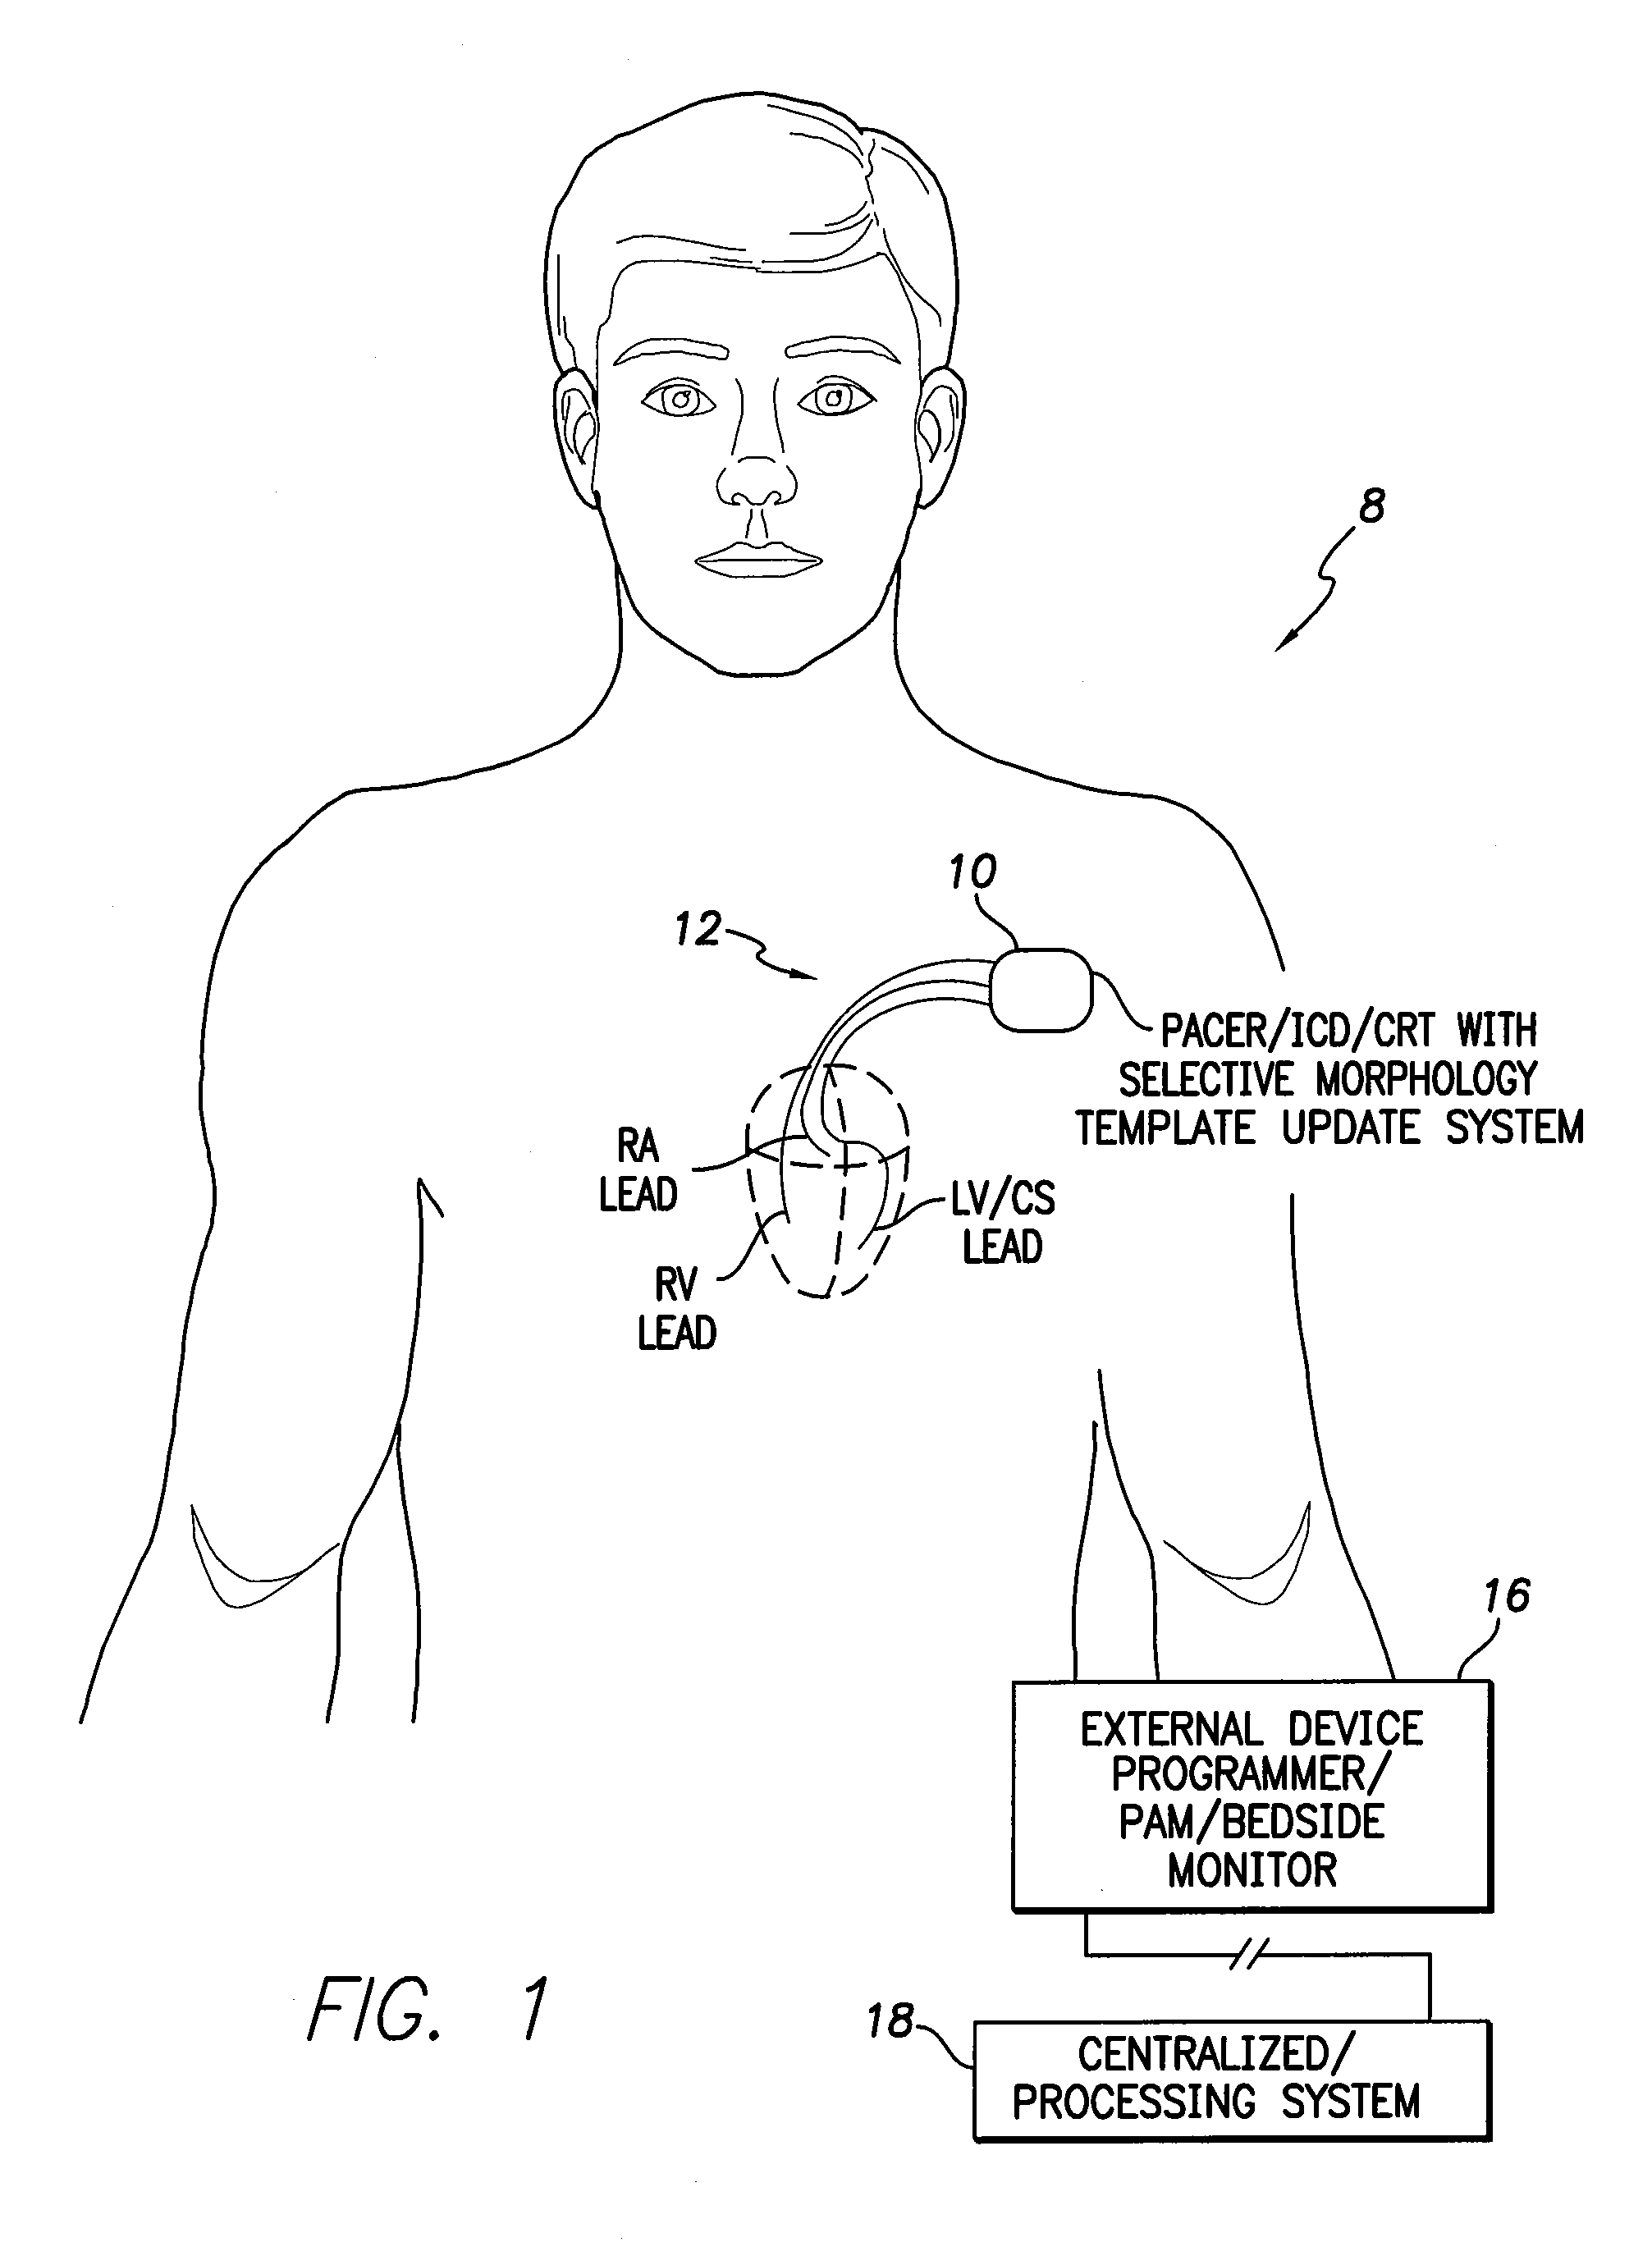 Systems and methods for selectively updating cardiac morphology discrimination templates for use with implantable medical devices